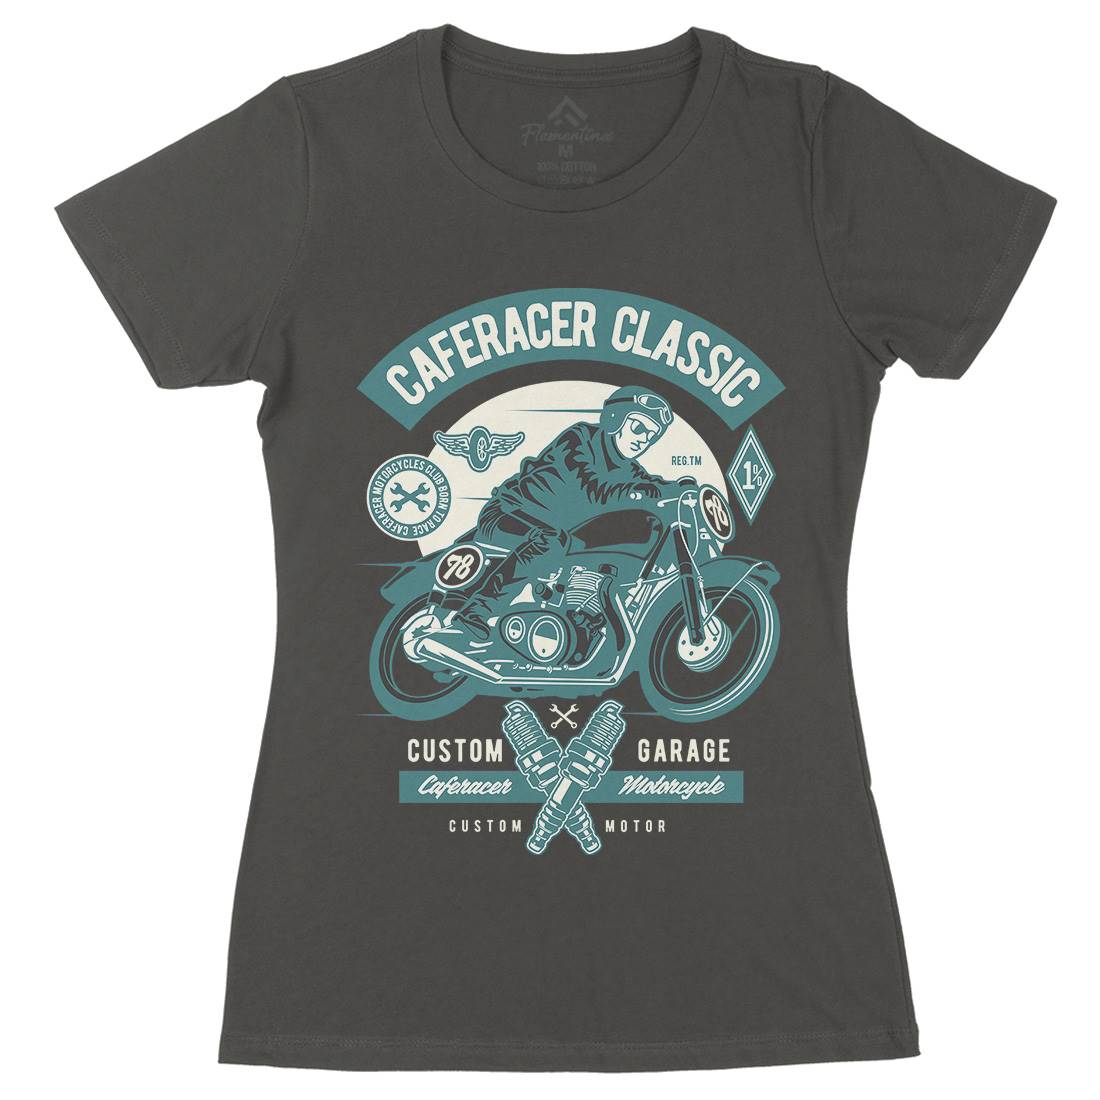 Caferacer Rider Womens Organic Crew Neck T-Shirt Motorcycles D515